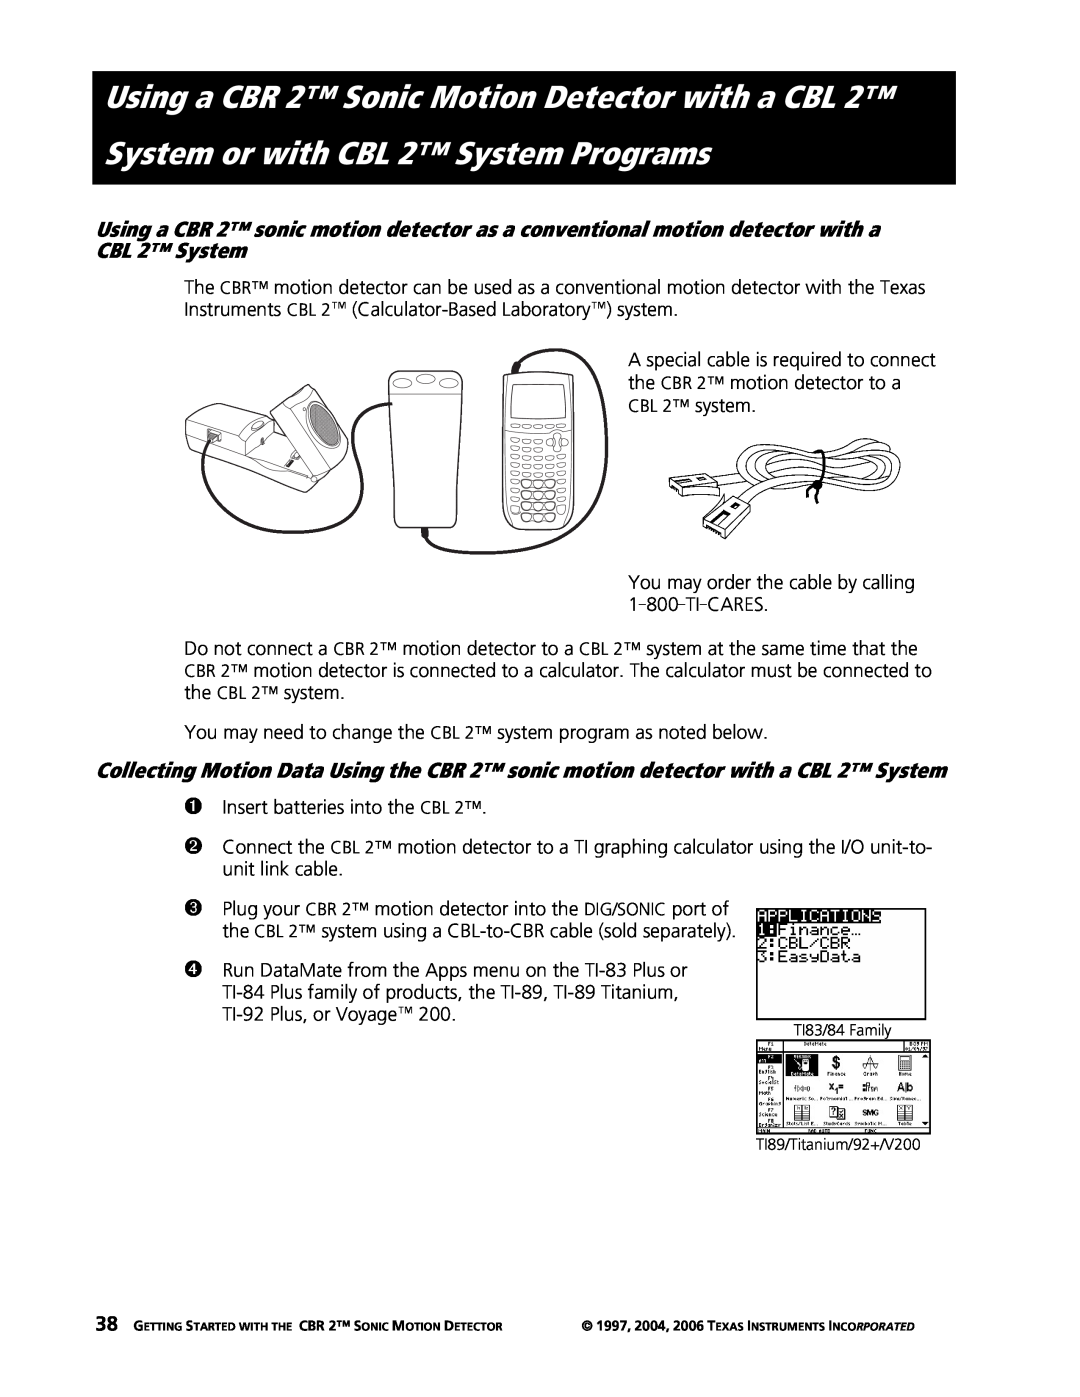 Texas Instruments manual Using a CBR 2 Sonic Motion Detector with a CBL, System or with CBL 2 System Programs 